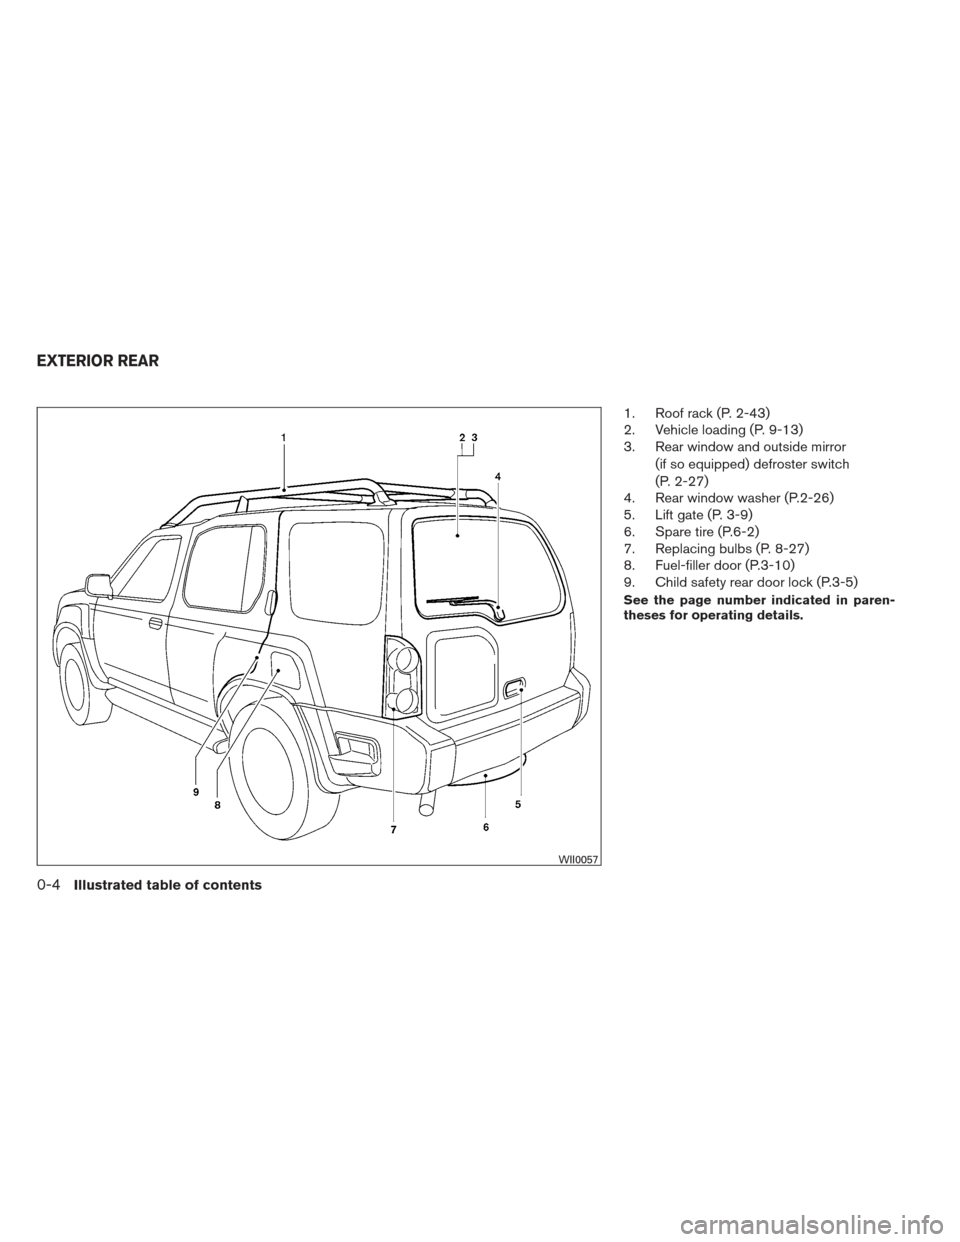 NISSAN XTERRA 2012 N50 / 2.G User Guide 1. Roof rack (P. 2-43)
2. Vehicle loading (P. 9-13)
3. Rear window and outside mirror(if so equipped) defroster switch
(P. 2-27)
4. Rear window washer (P.2-26)
5. Lift gate (P. 3-9)
6. Spare tire (P.6